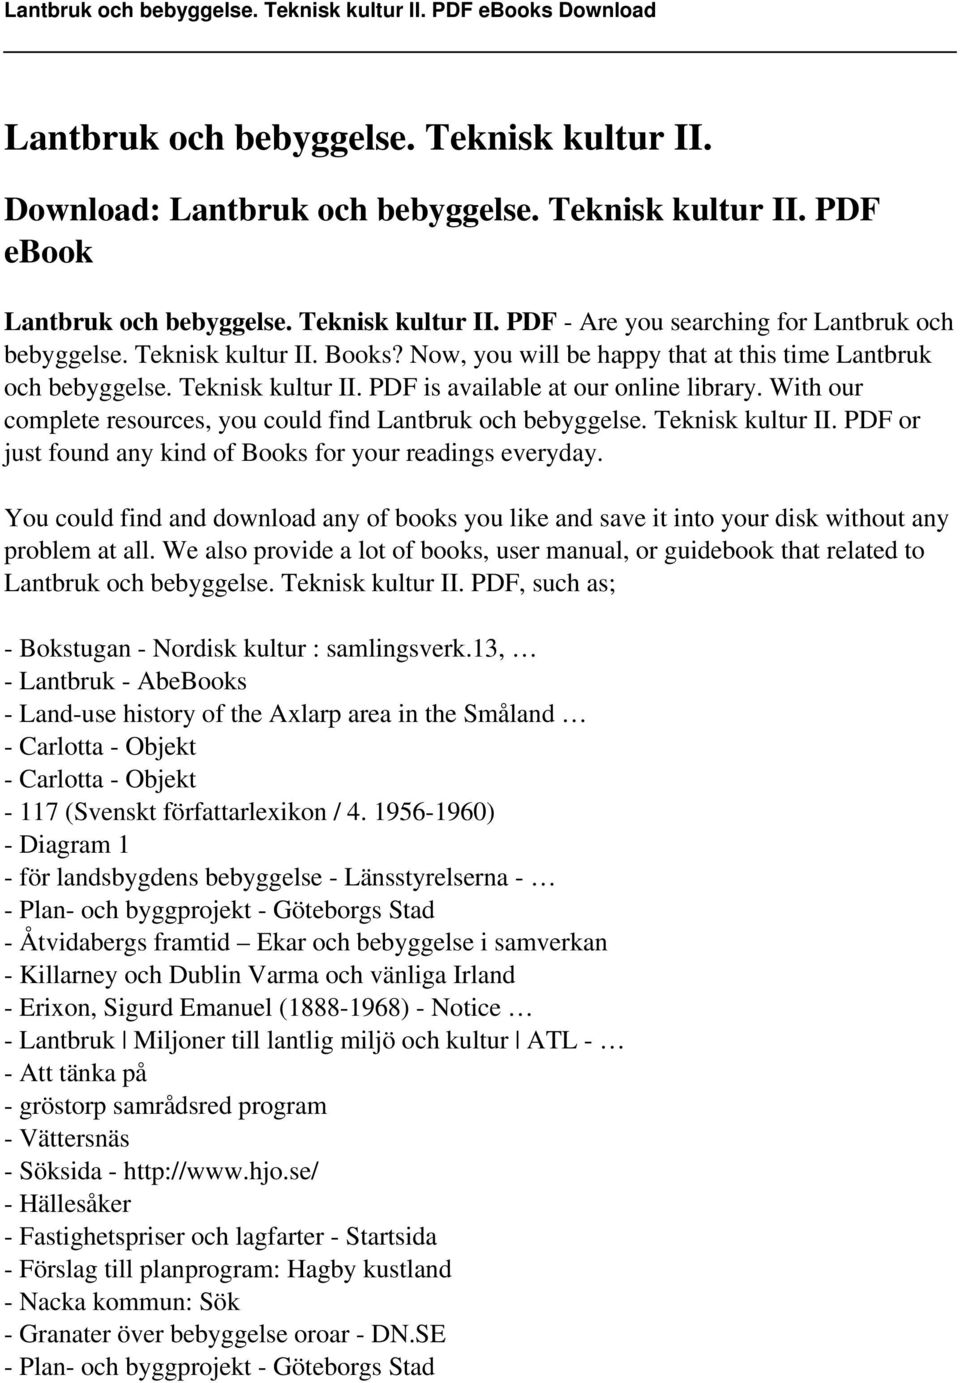 With our complete resources, you could find Lantbruk och bebyggelse. Teknisk kultur II. PDF or just found any kind of Books for your readings everyday.